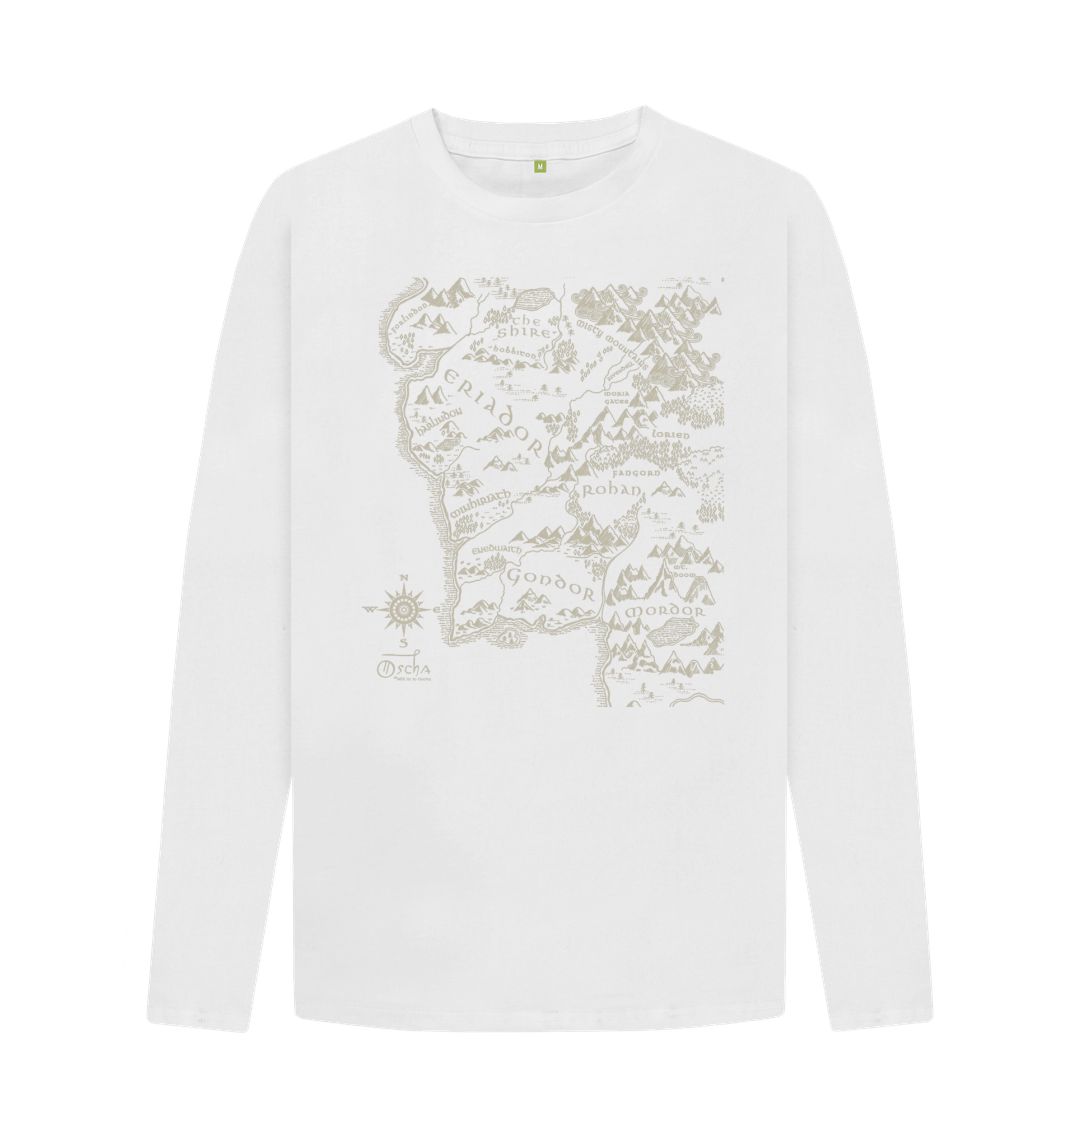 White Realm of MIDDLE-EARTH\u2122 Long Sleeved T-Shirt